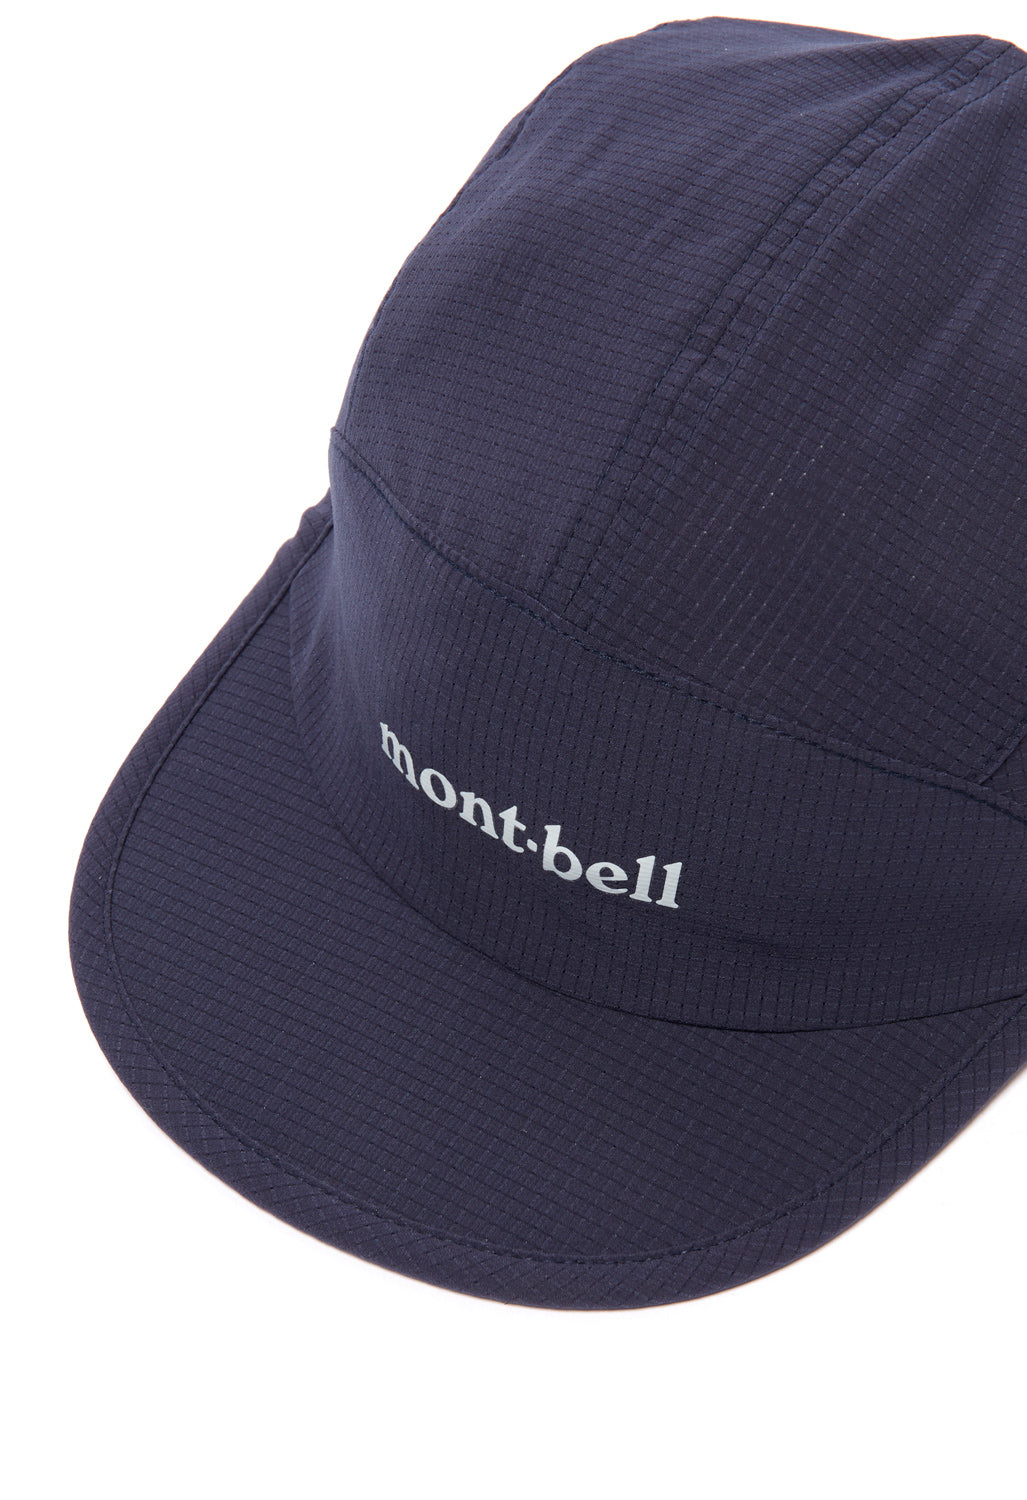 Montbell Breeze Dot Crushable Cap - Graphite – Outsiders Store UK